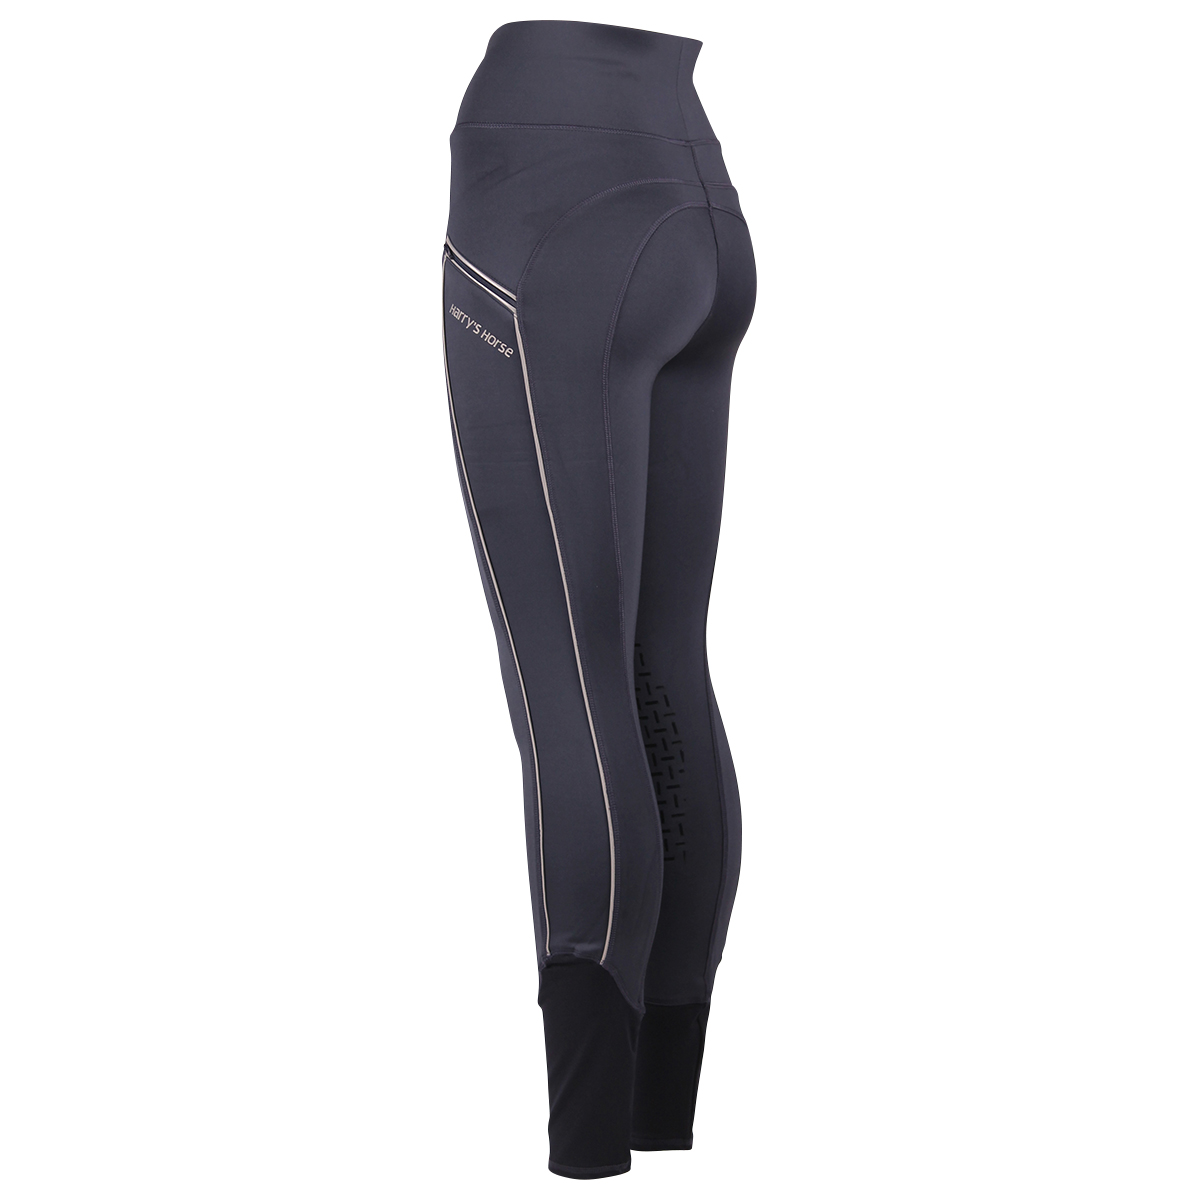 Rijlegging Harry&apos;s Horse Equitights Kniegrip Donkerblauw, 42 in donkerblauw